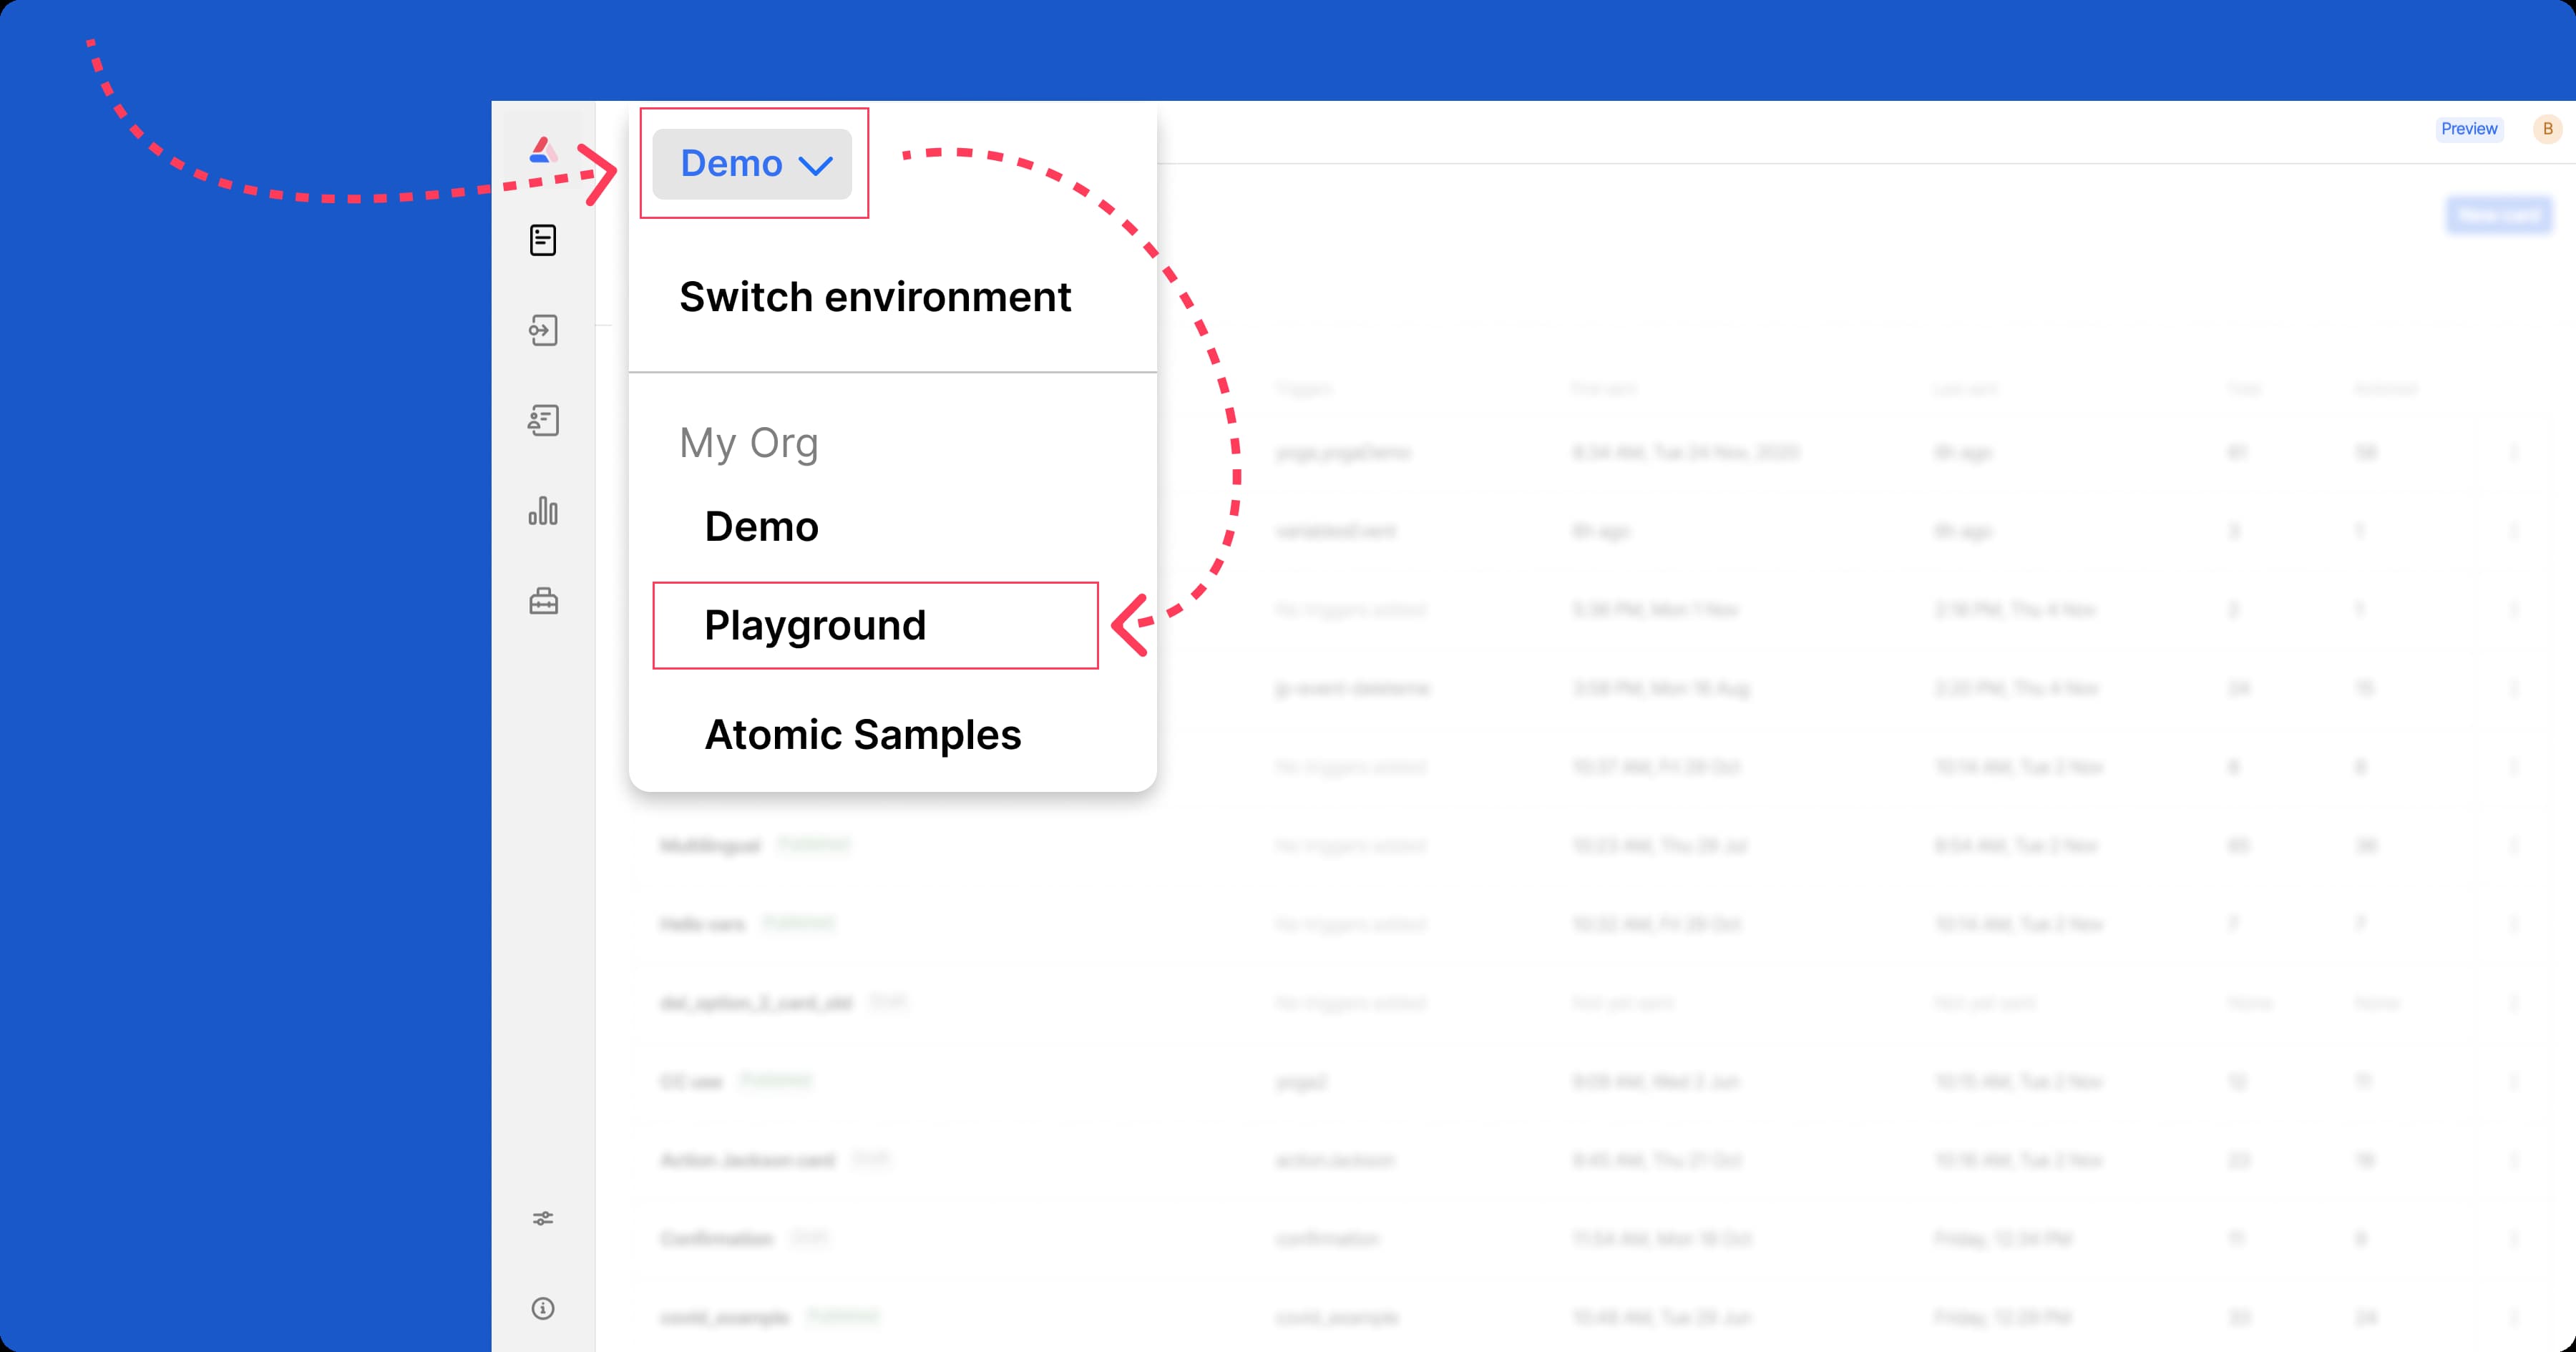 Switch environments by selecting the dropdown menu in the top left corner